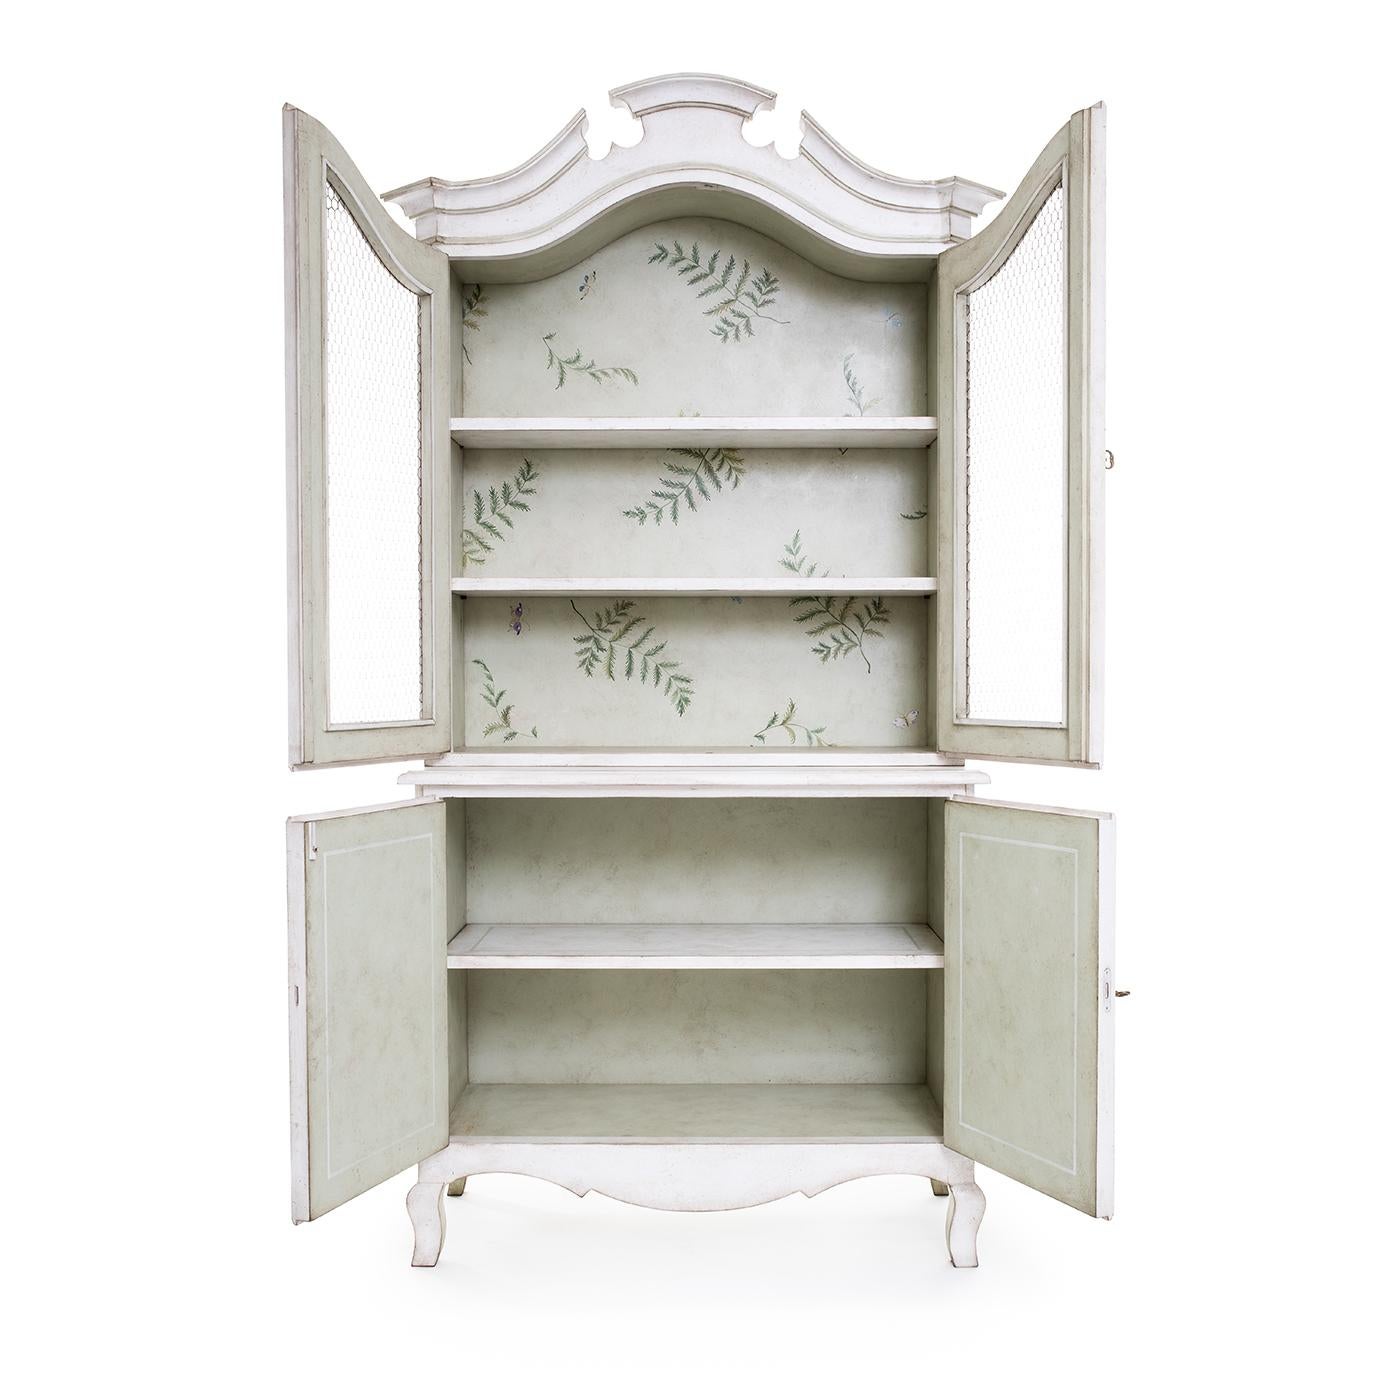 Presenting the Padua Hutch, a delightful addition to your living space. This lovely hutch, hand-painted in a captivating chalky white, instantly brightens your living areas. Its see-through design, crafted with intricate chicken wire and adorned